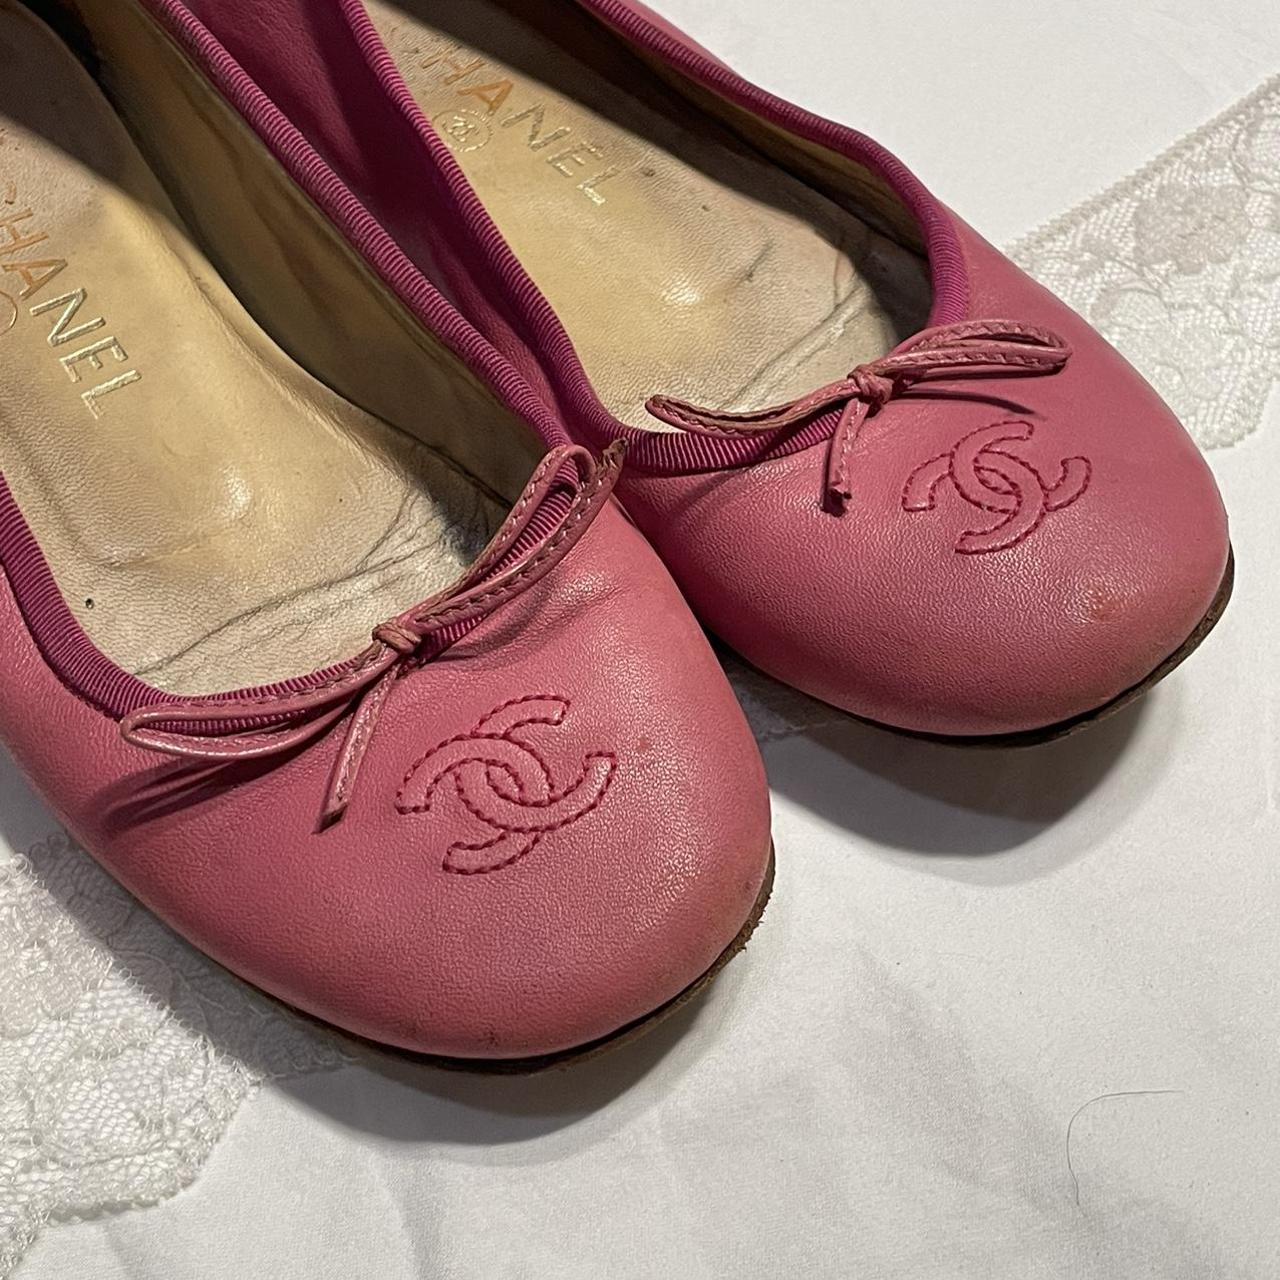 Chanel Women's Ballet Shoes - Pink - US 5